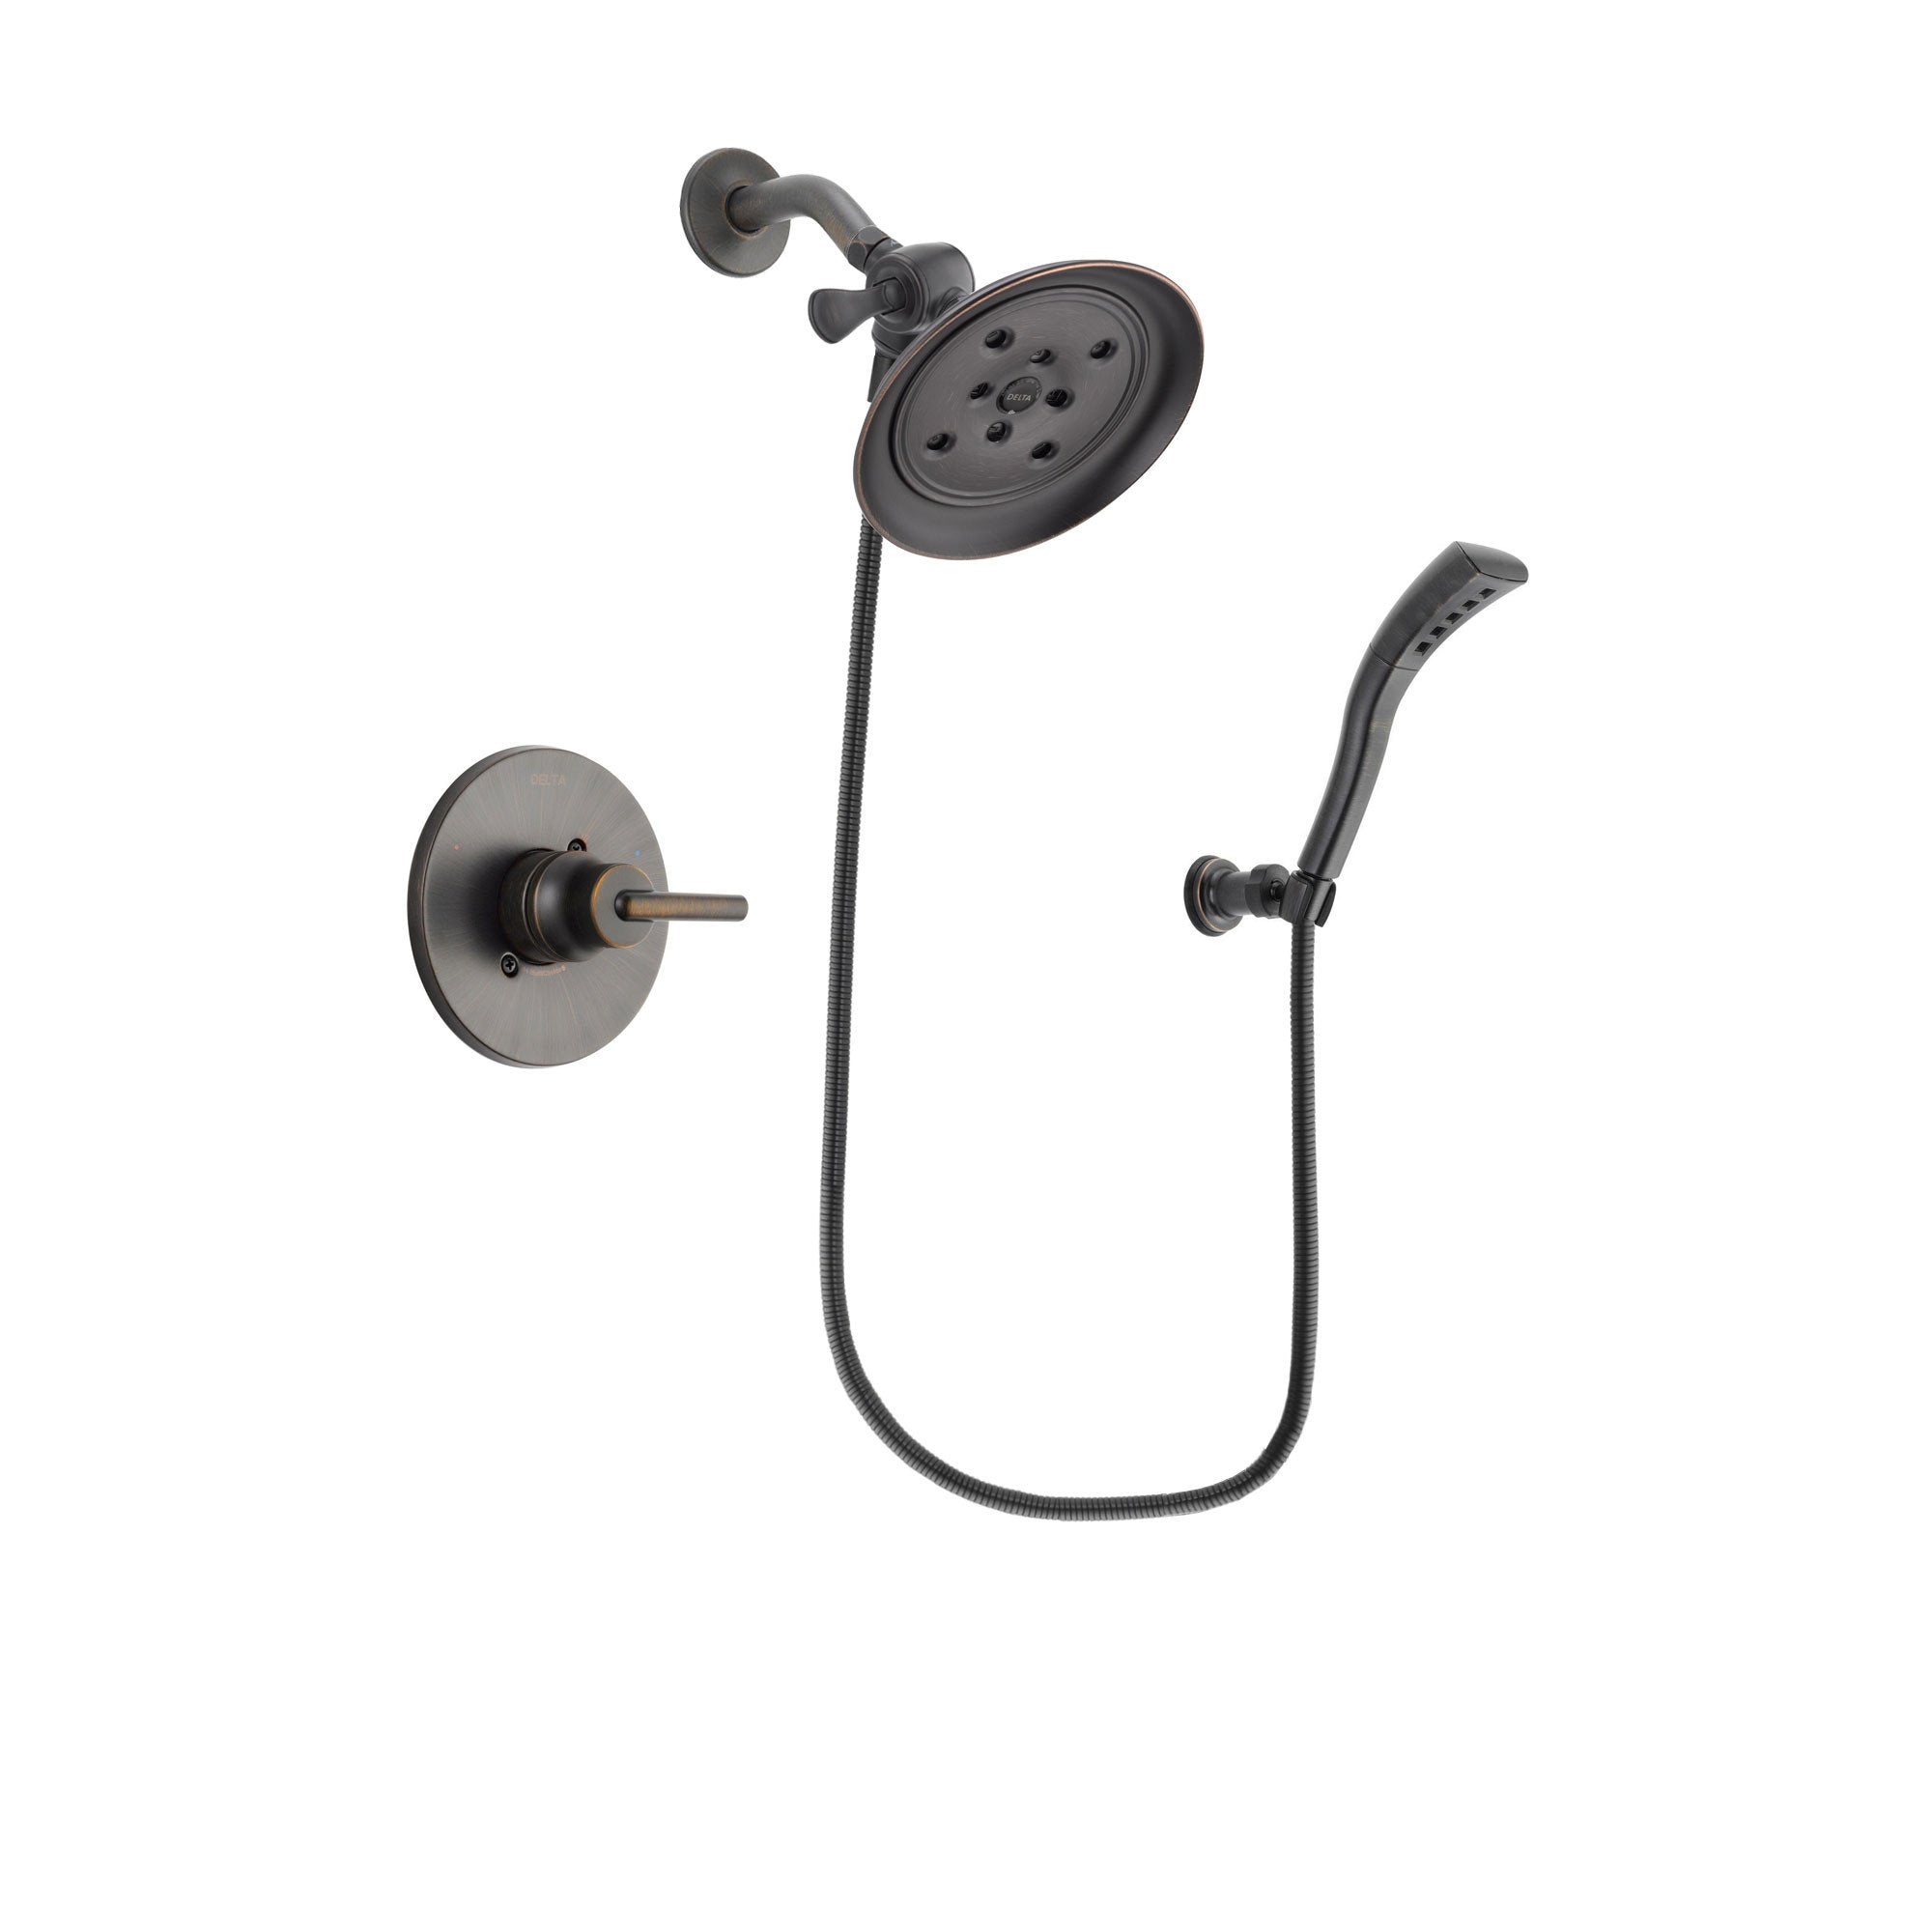 Delta Trinsic Venetian Bronze Finish Shower Faucet System Package with Large Rain Shower Head and Modern Wall Mount Personal Handheld Shower Spray Includes Rough-in Valve DSP2934V